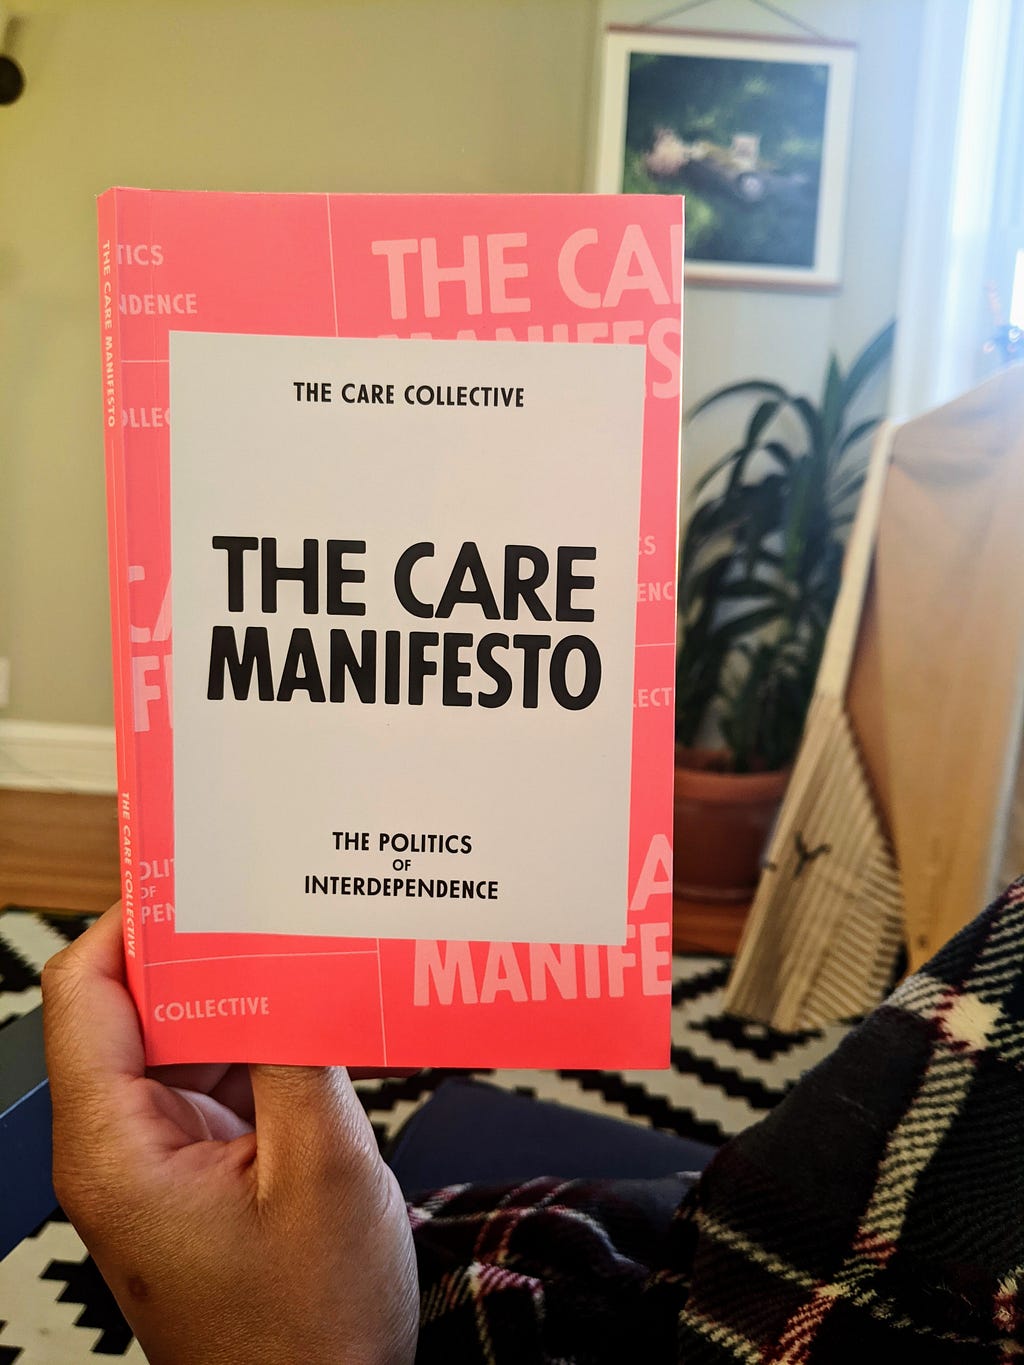 The Care Manifesto: The Politics of Interdependence by The Care Collective